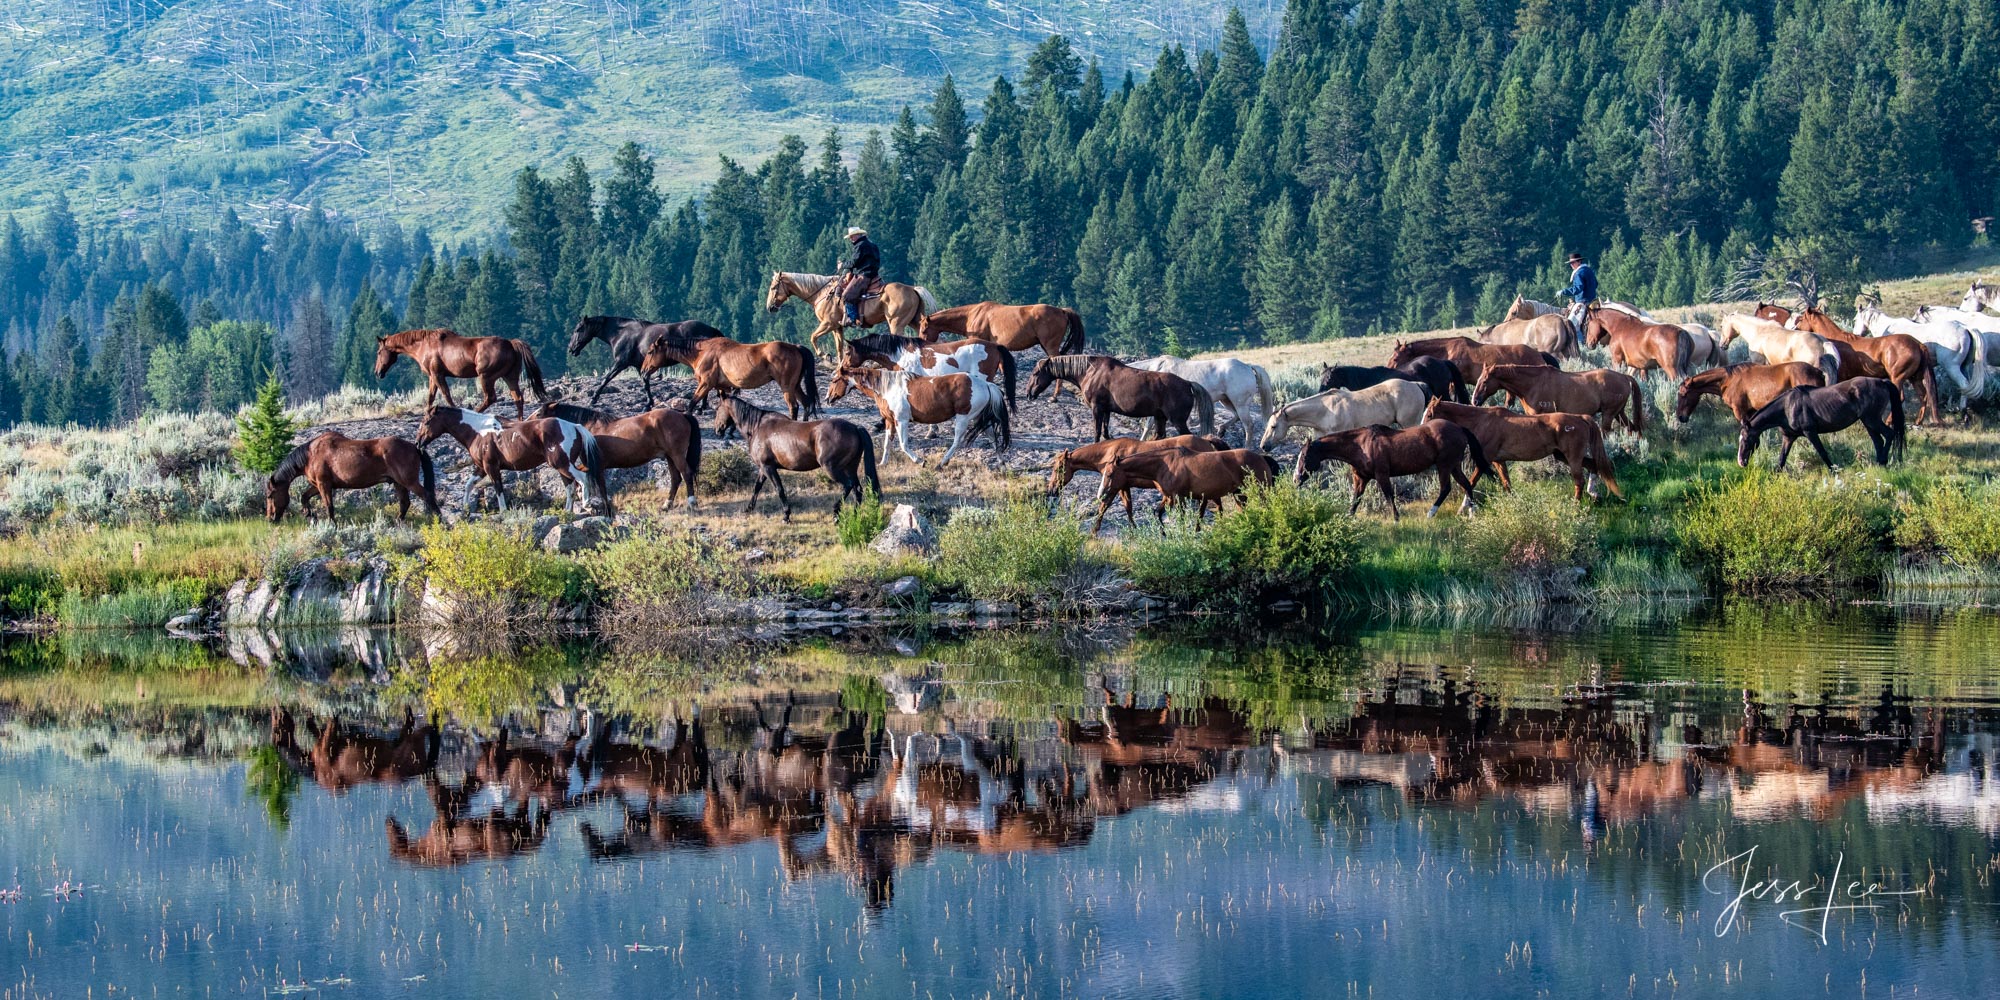 Fine Art Limited Edition Photography of Cowboys, Horses and life in the West. Wyoming Cowboys bring the horse herd to morning...